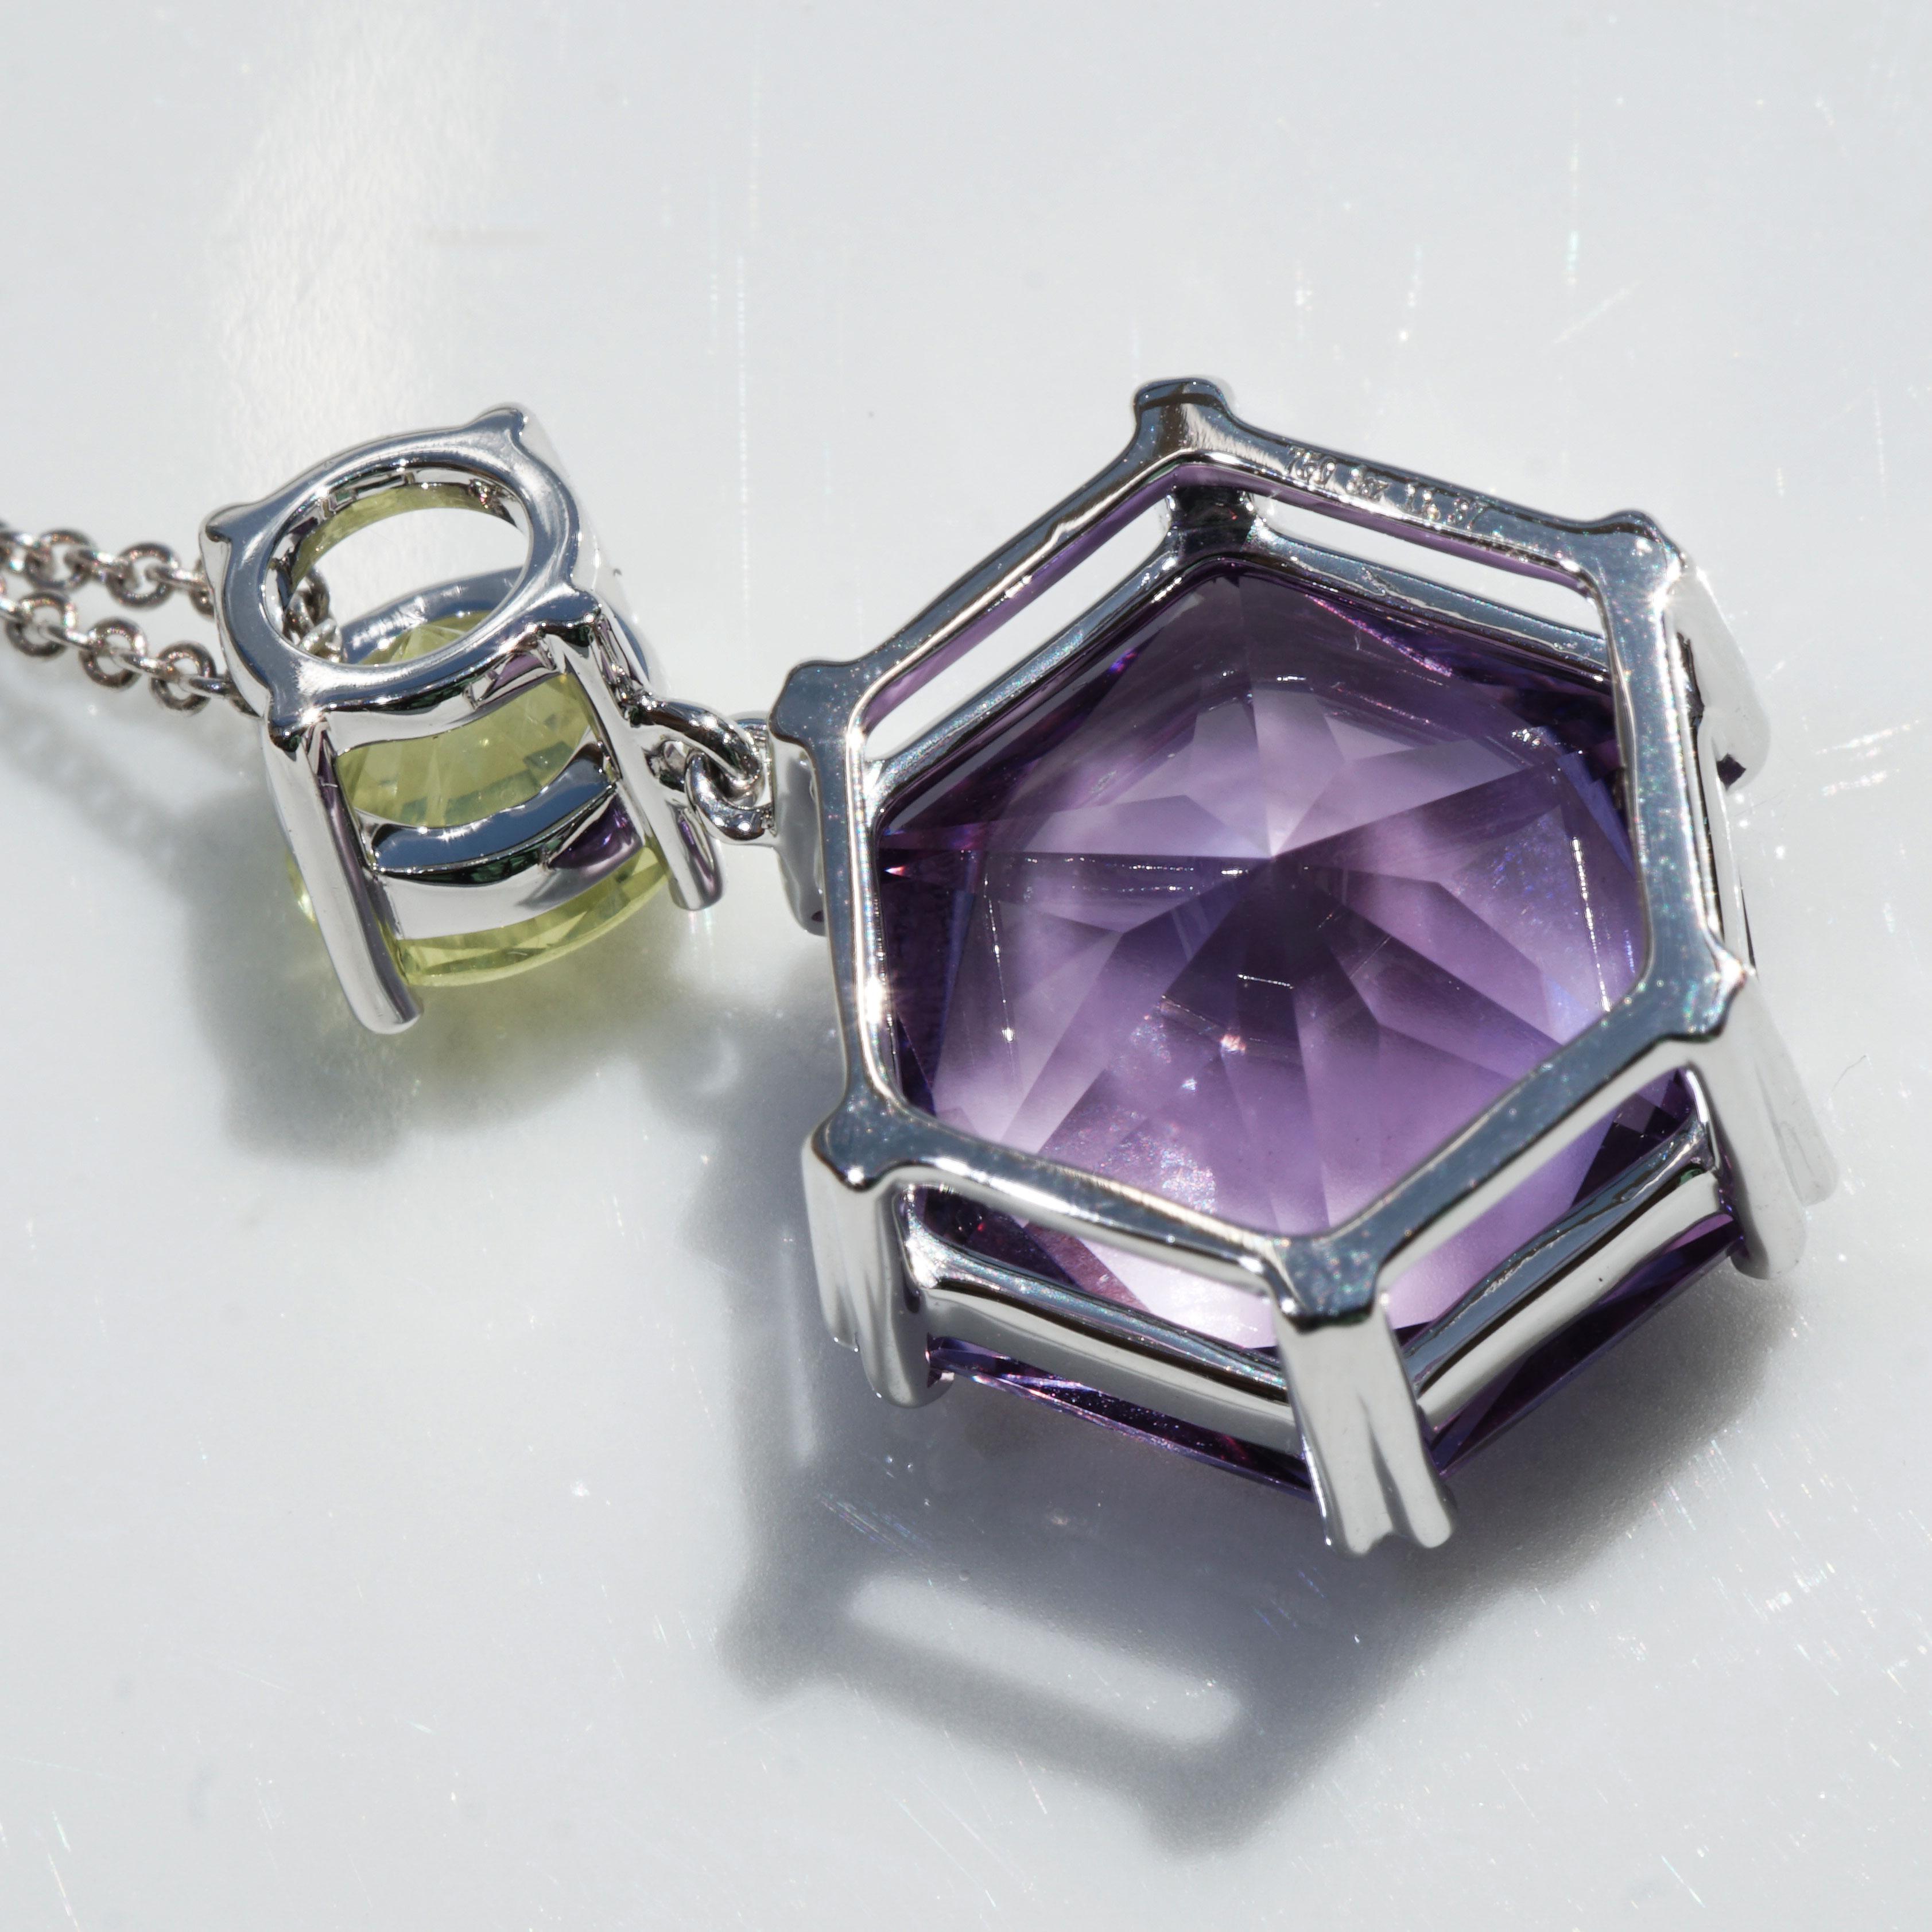 Women's or Men's Chrysoberyll Amethyst Pendant with Chain neverseen Colors 10 ct Star Cut Brazil For Sale